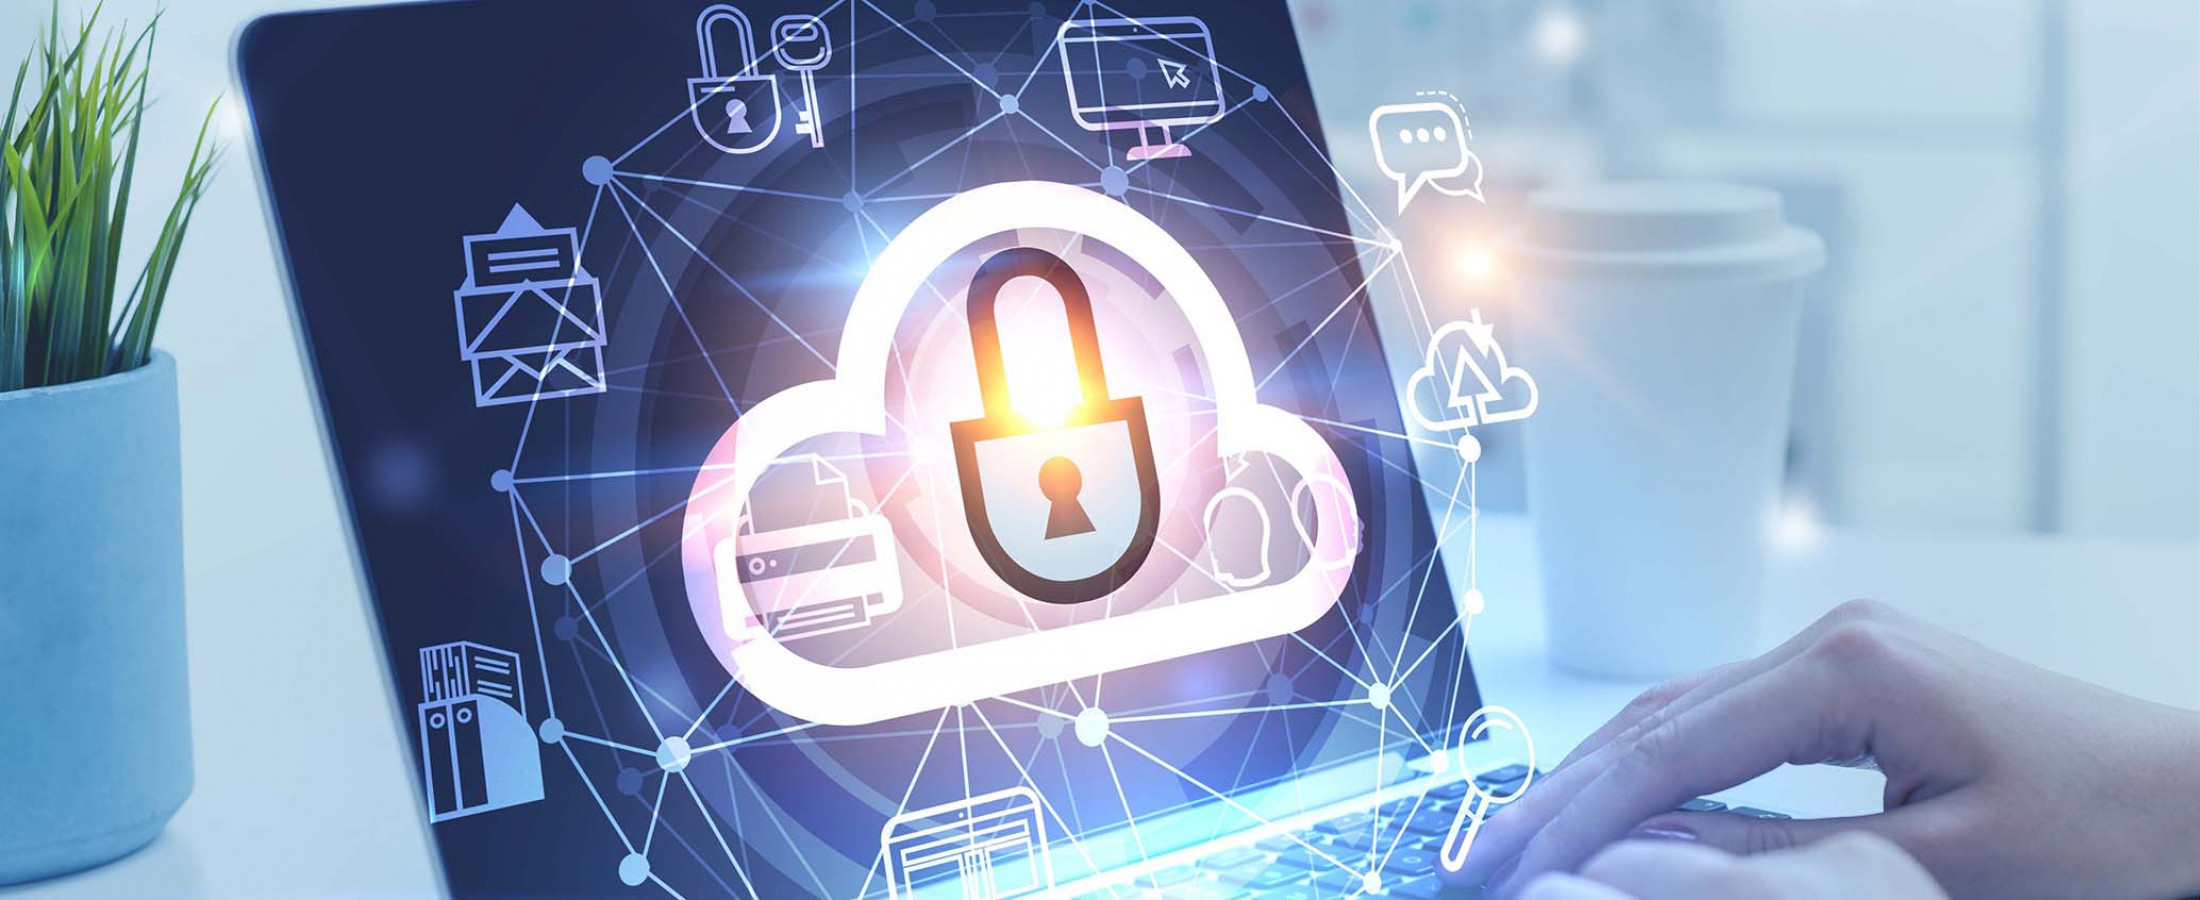 How safe are your documents in the cloud?